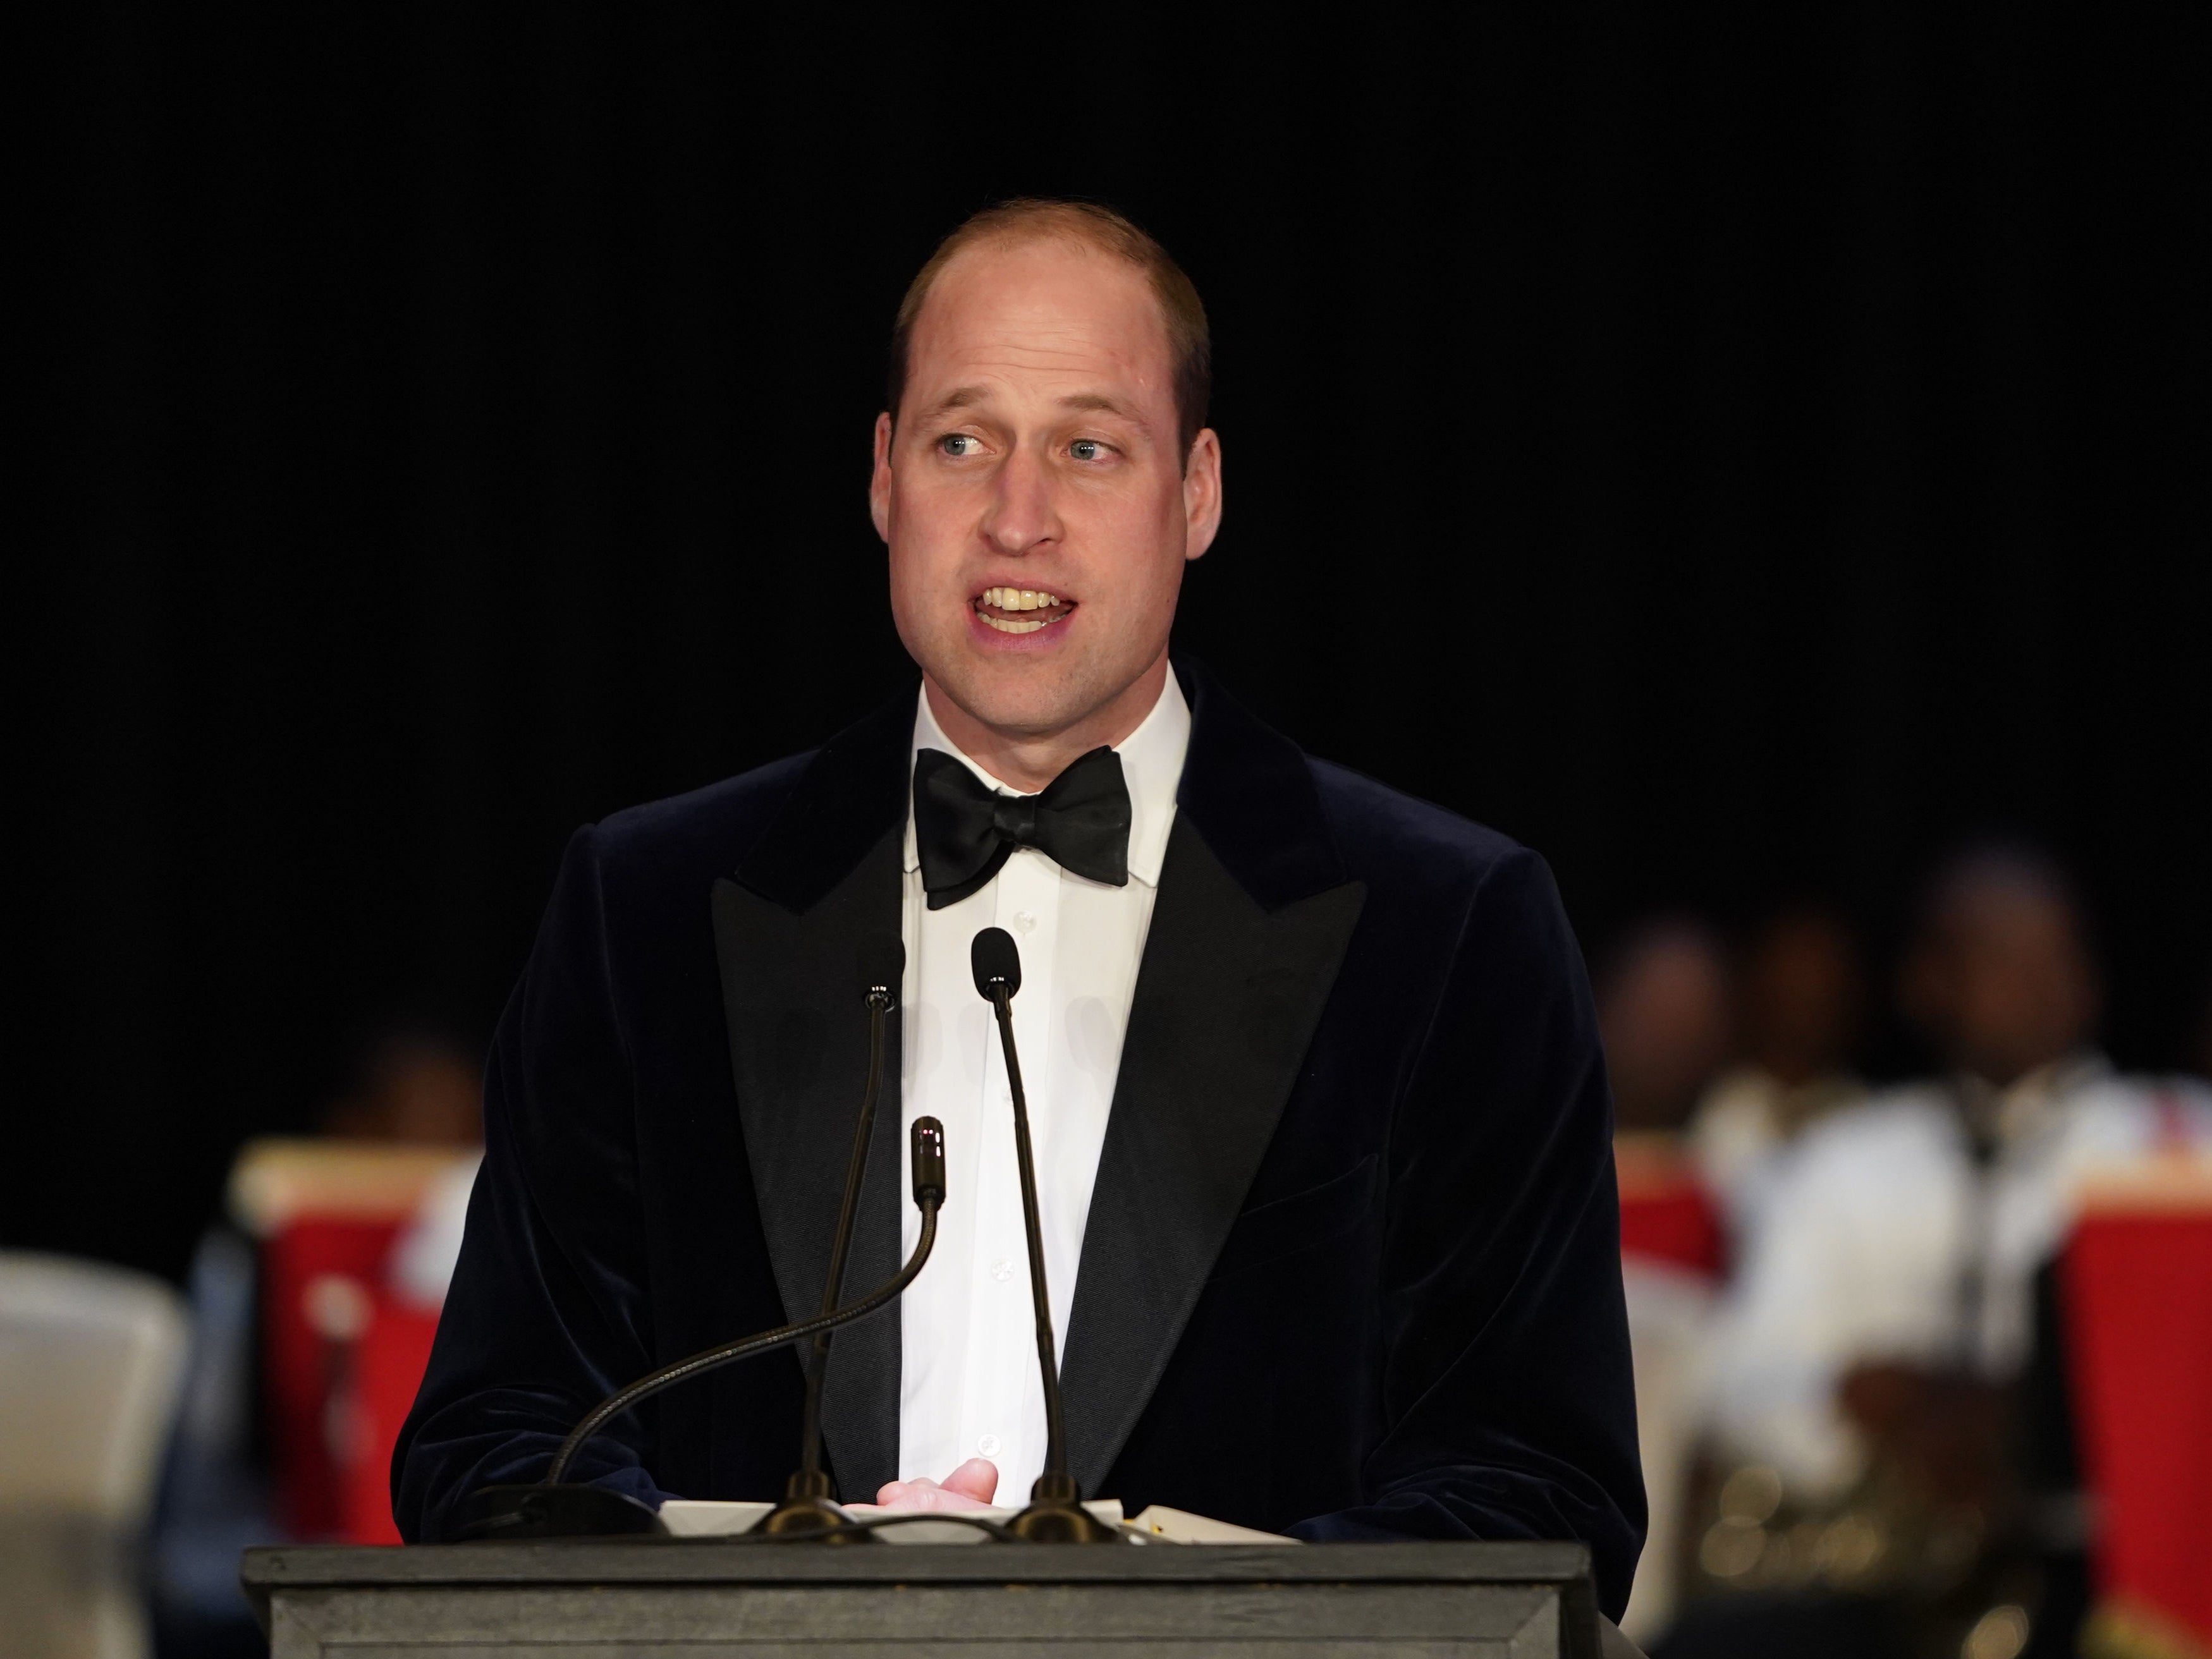 The Duke of Cambridge speaks at a reception hosted by the Governor General of the Bahamas Sir Cornelius Alvin Smith in the Bahamas